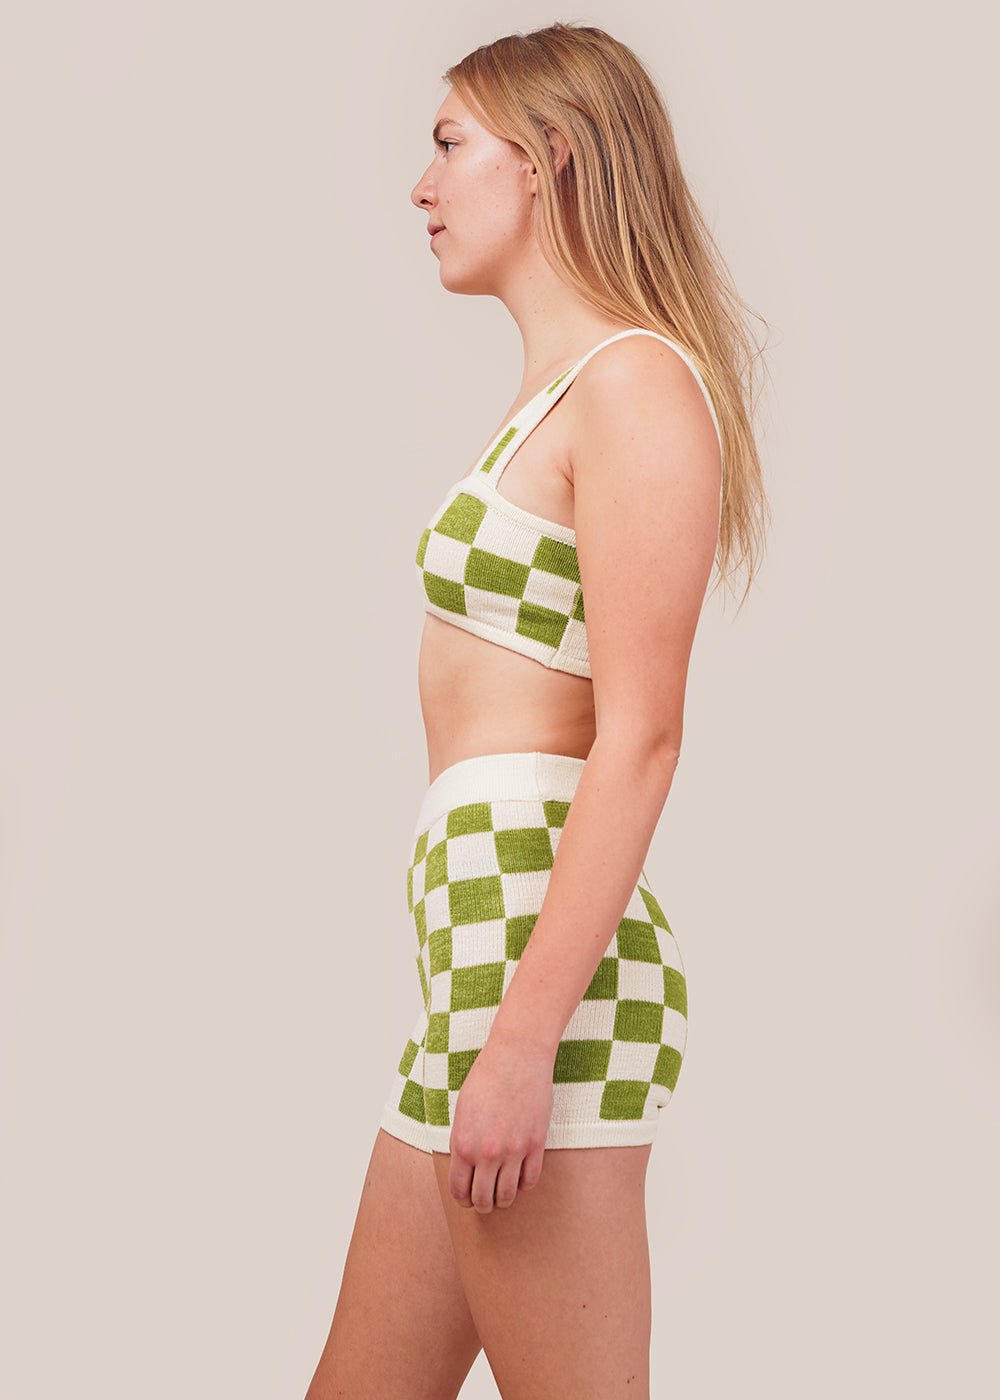 Belle The Label Wasabi Knit Shorts - New Classics Studios Sustainable Ethical Fashion Canada